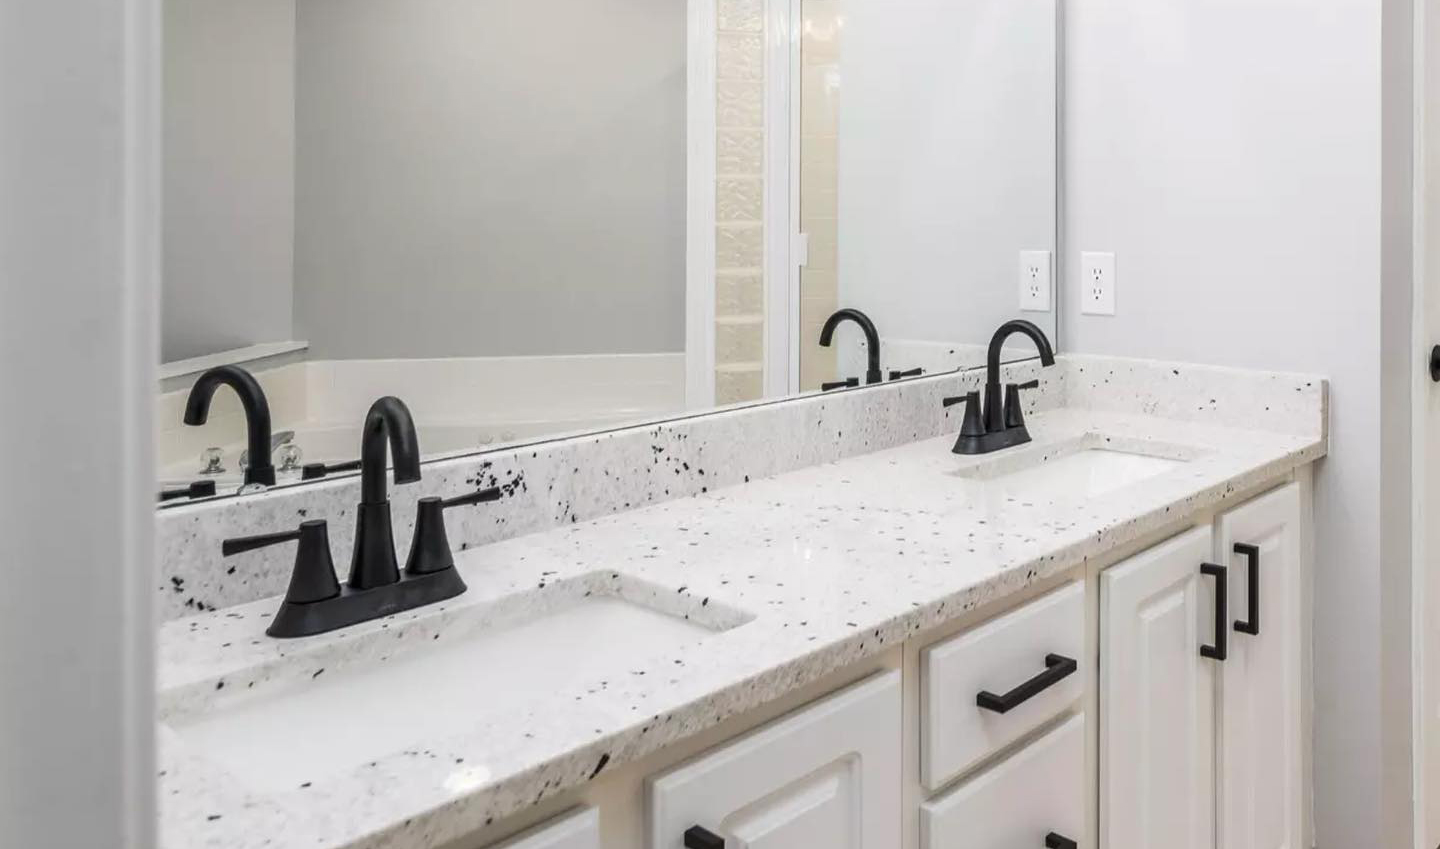 Is it time to replace my bathroom countertops?